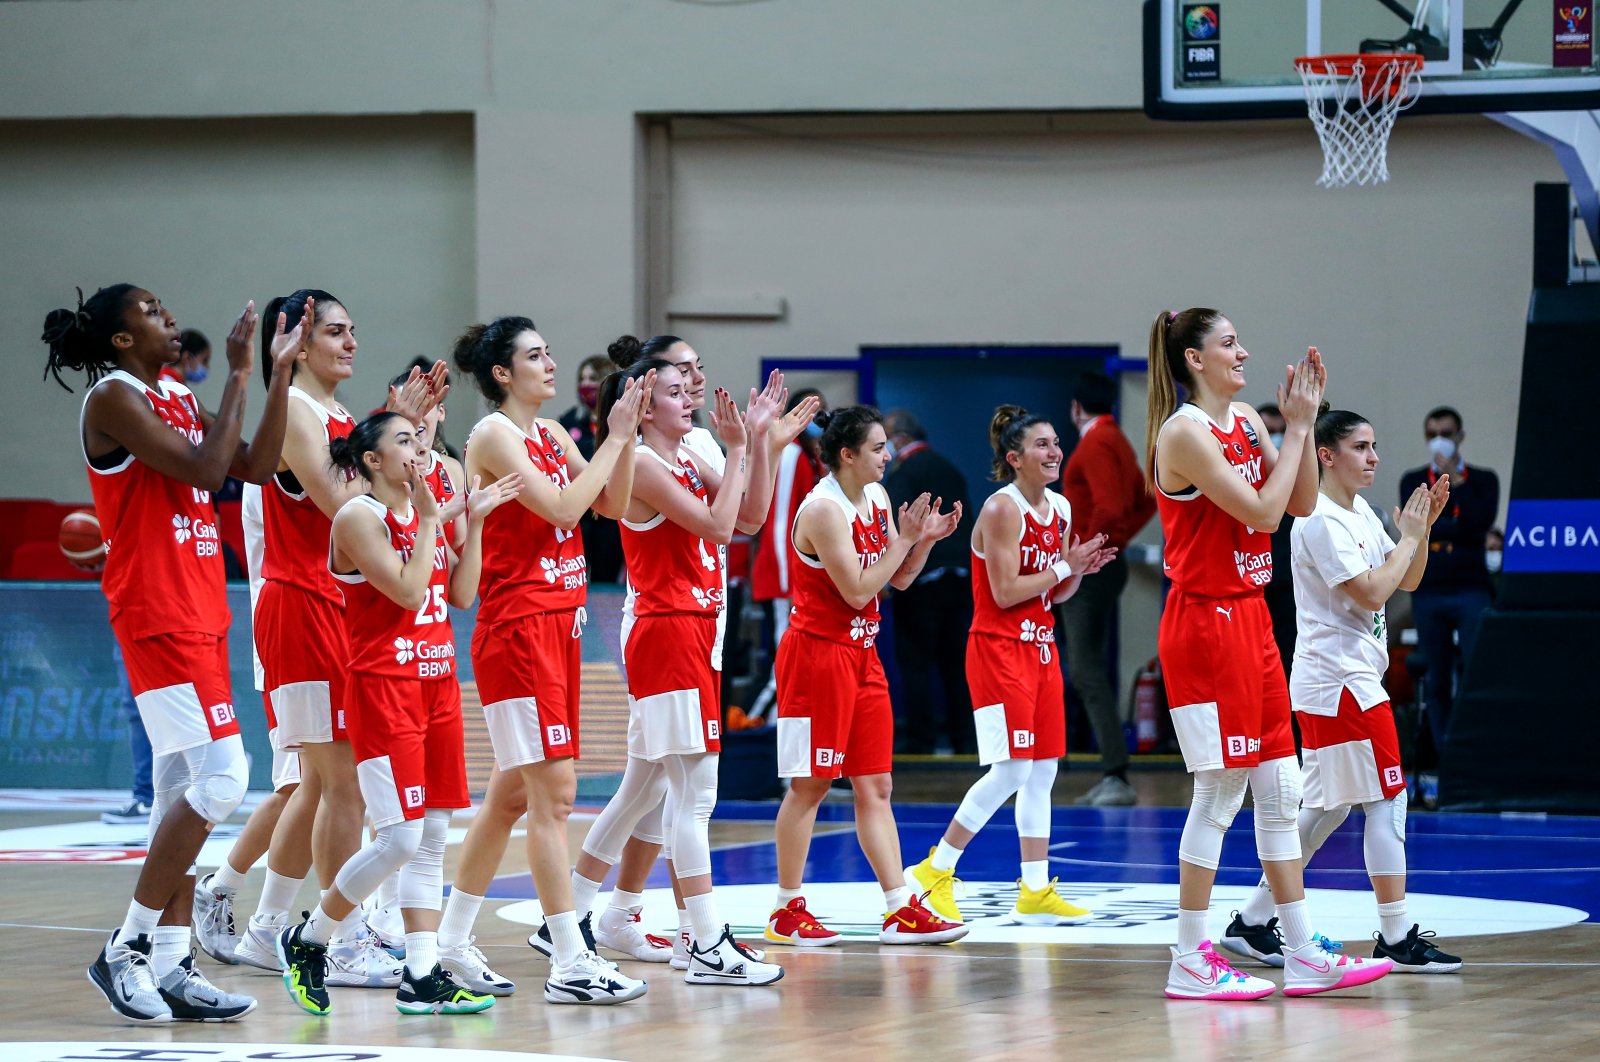 The Turkish Women’s National Basketball Team celebrates winning its Group E Women's EuroBasket 2021 qualifiers match against Lithuania at the Ahmet Cömert Sports Center, Istanbul, Turkey, Feb. 4, 2021. (AA Photo)